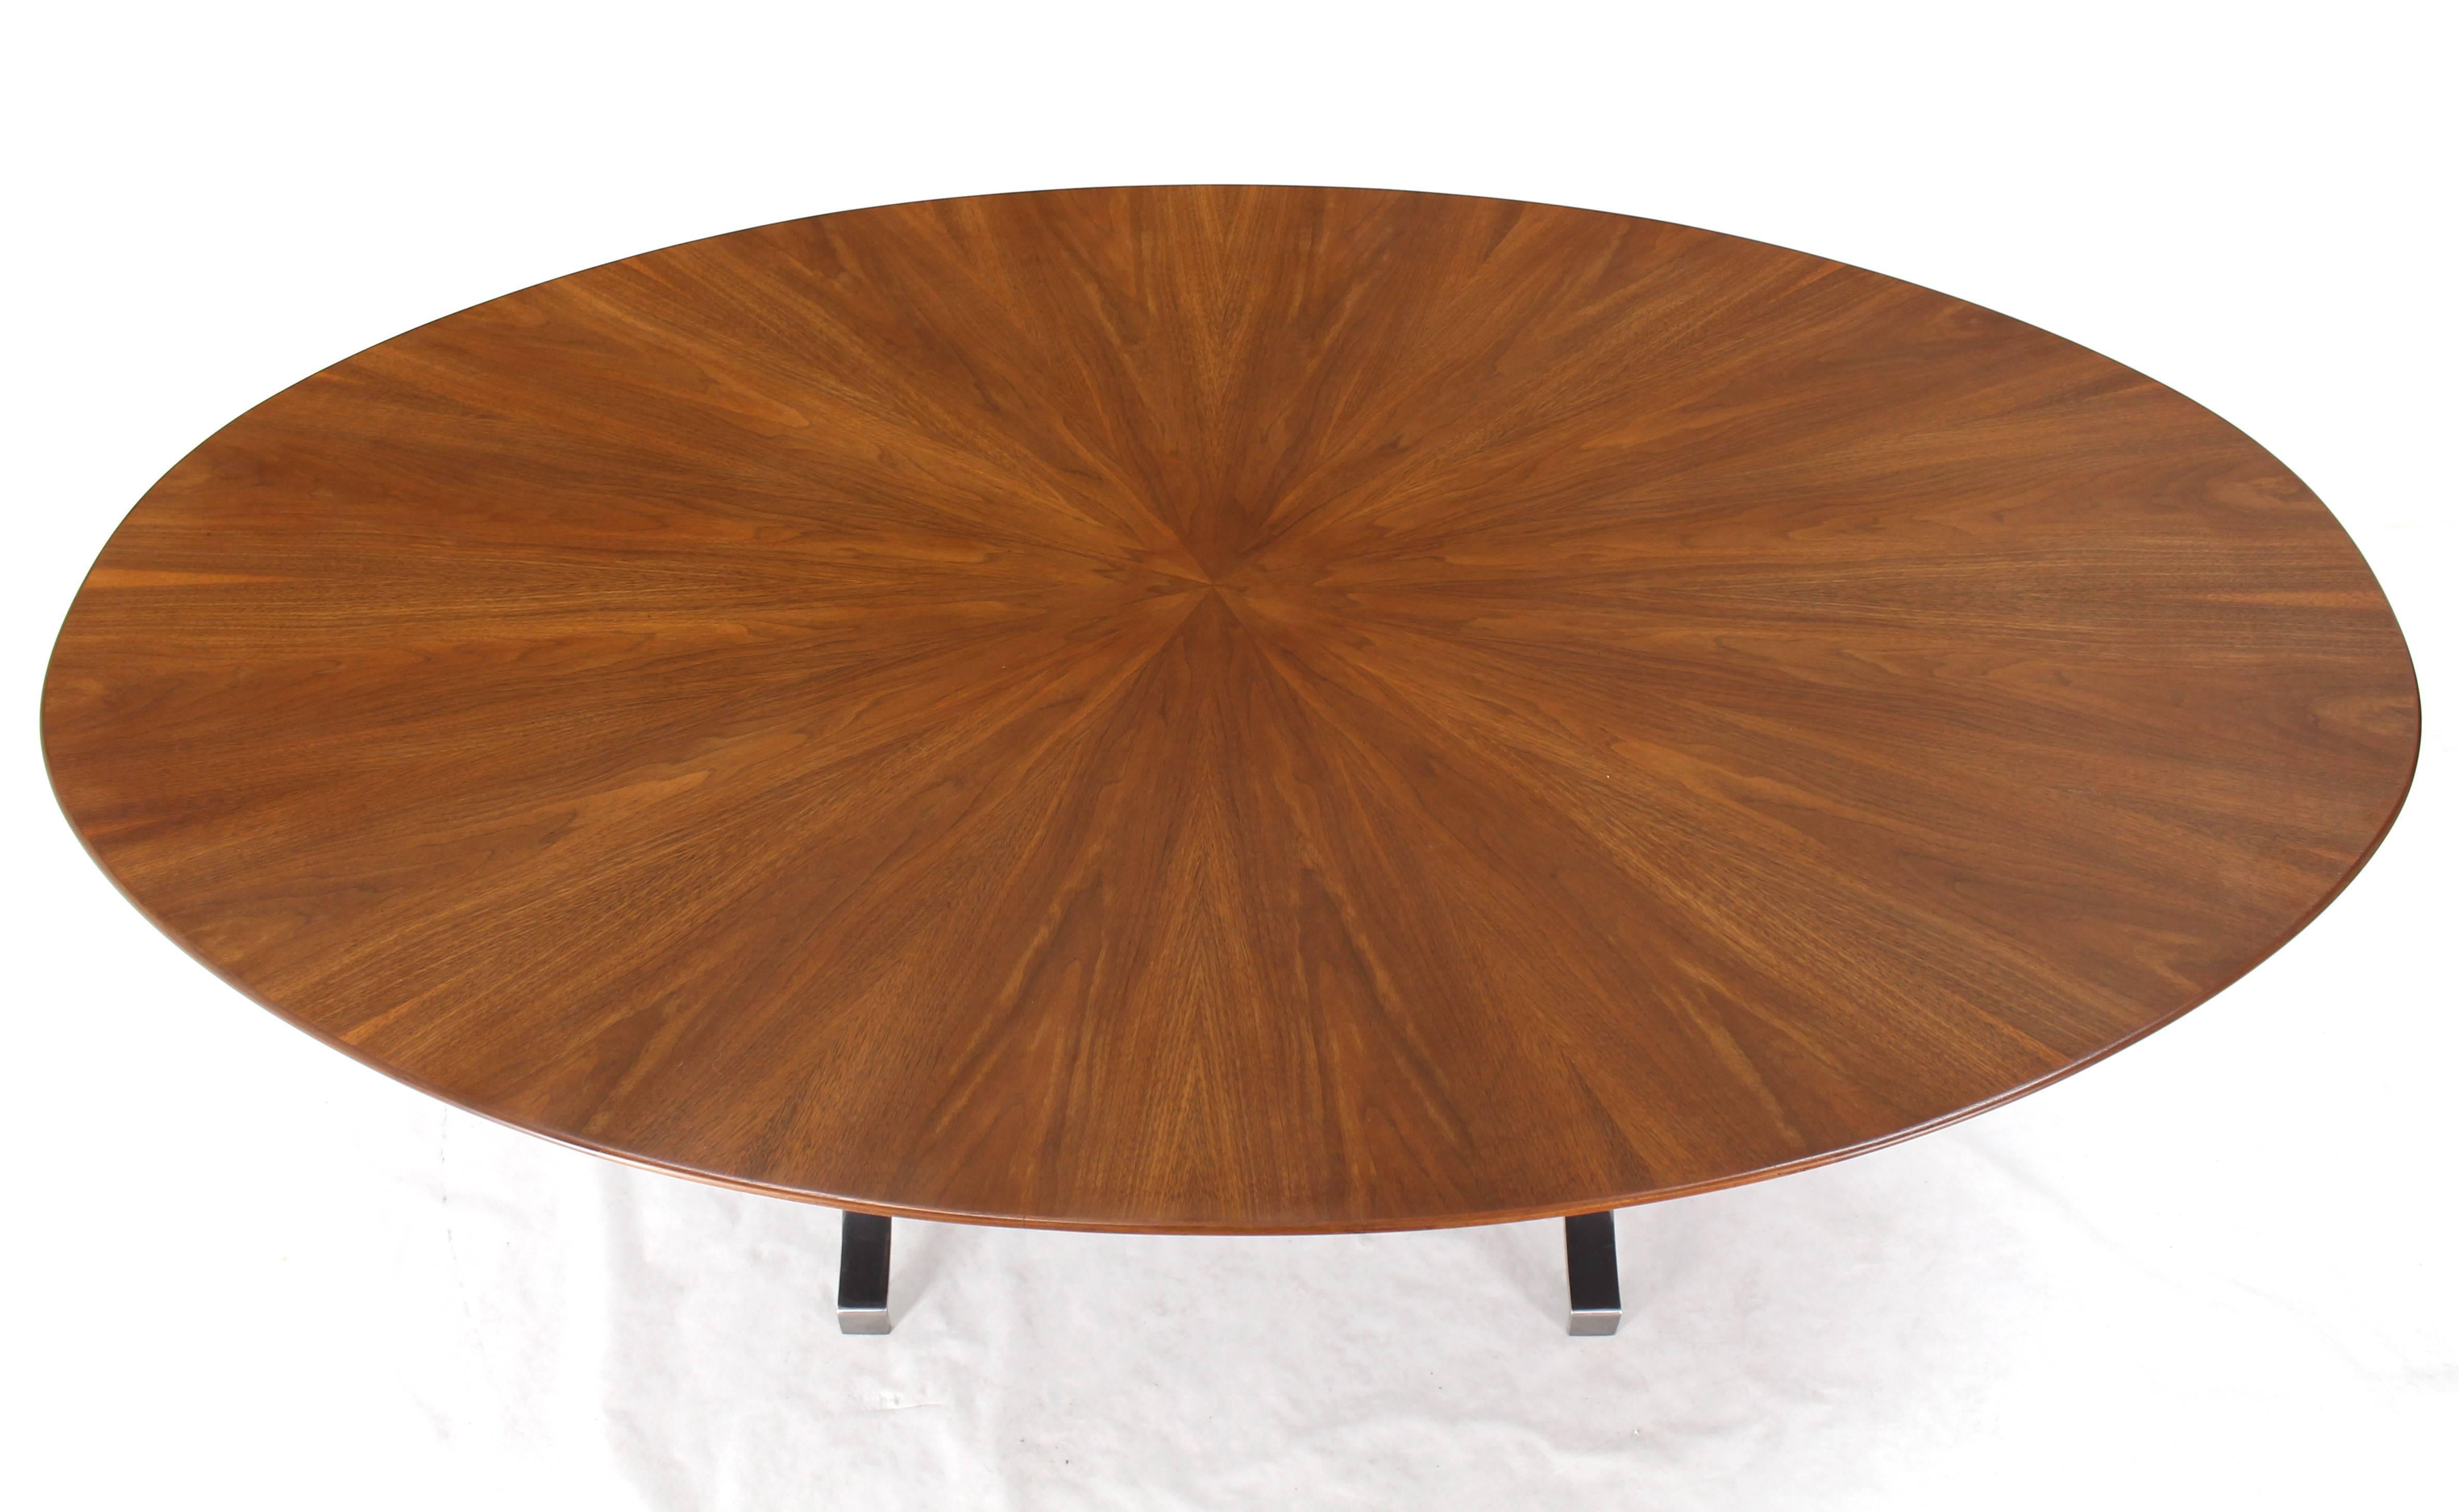 20th Century American Oval Walnut Top Stainless Steel Base Dining Conference Table